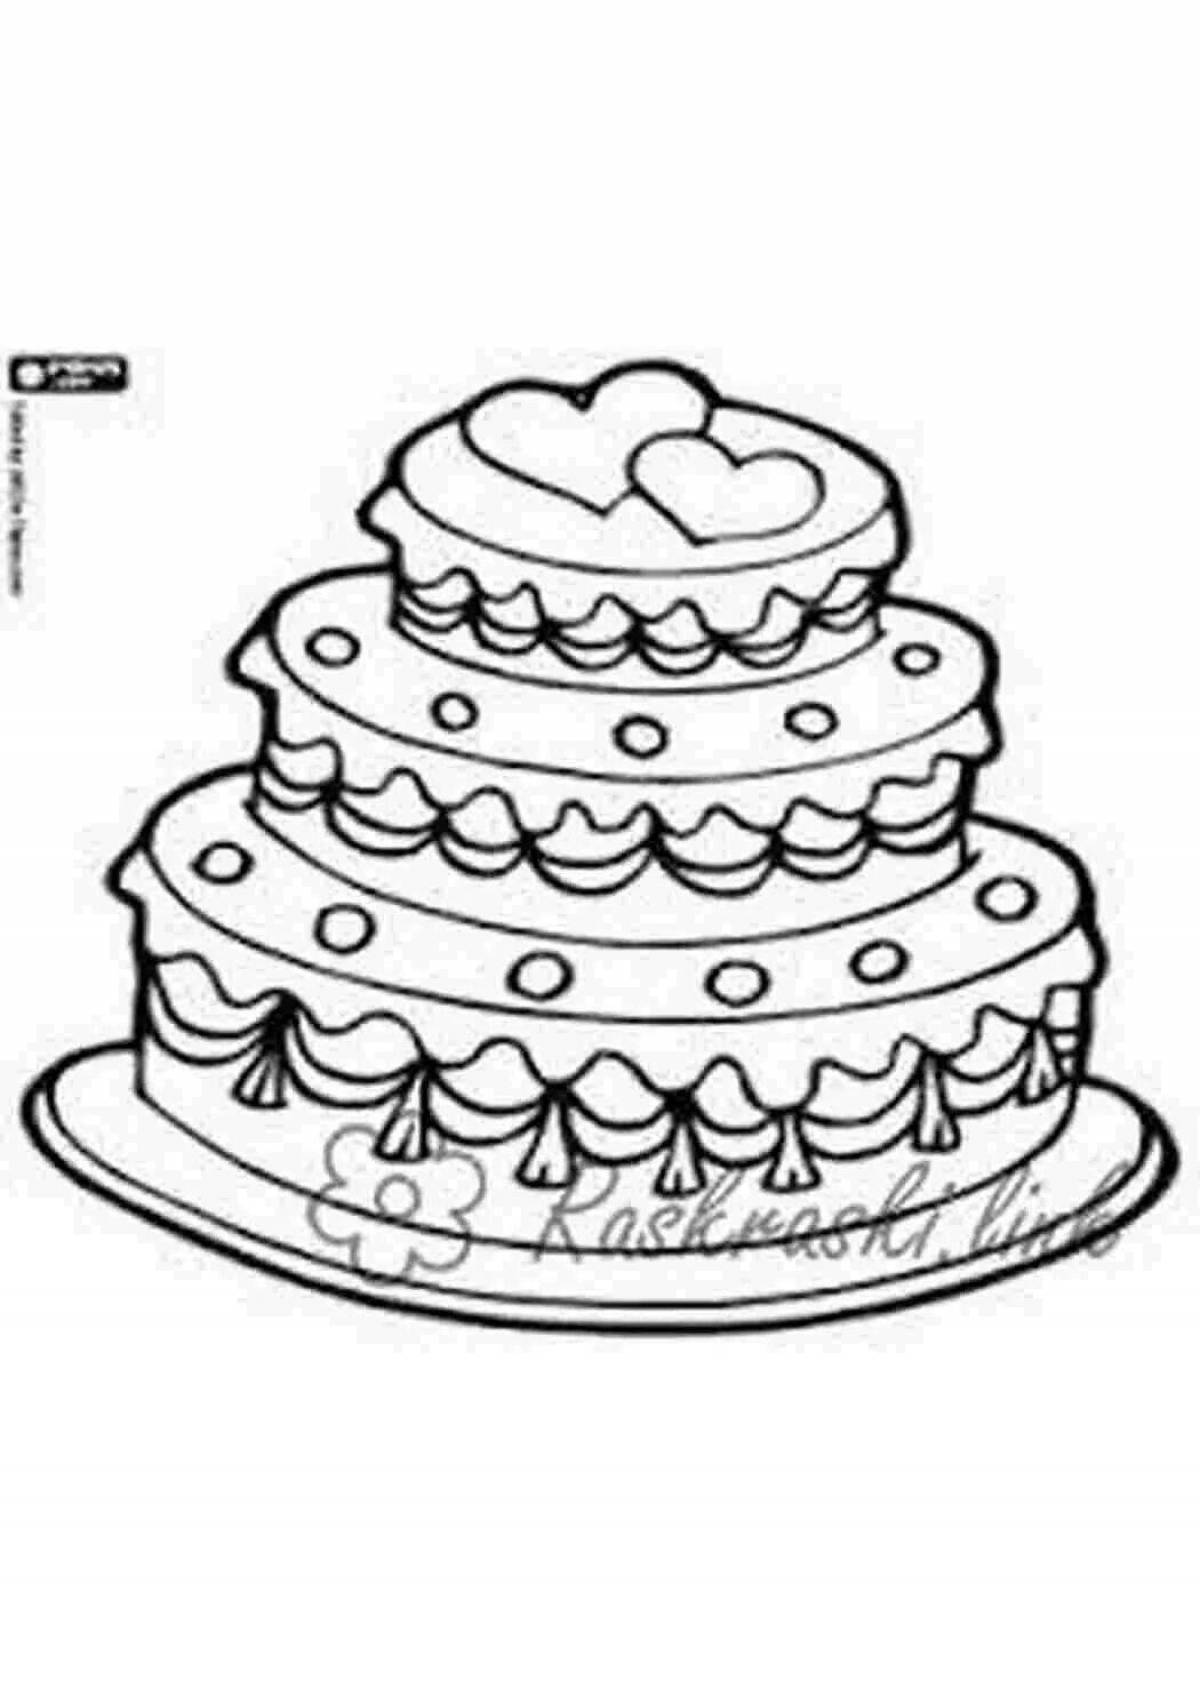 Colorful chocolate cake coloring book